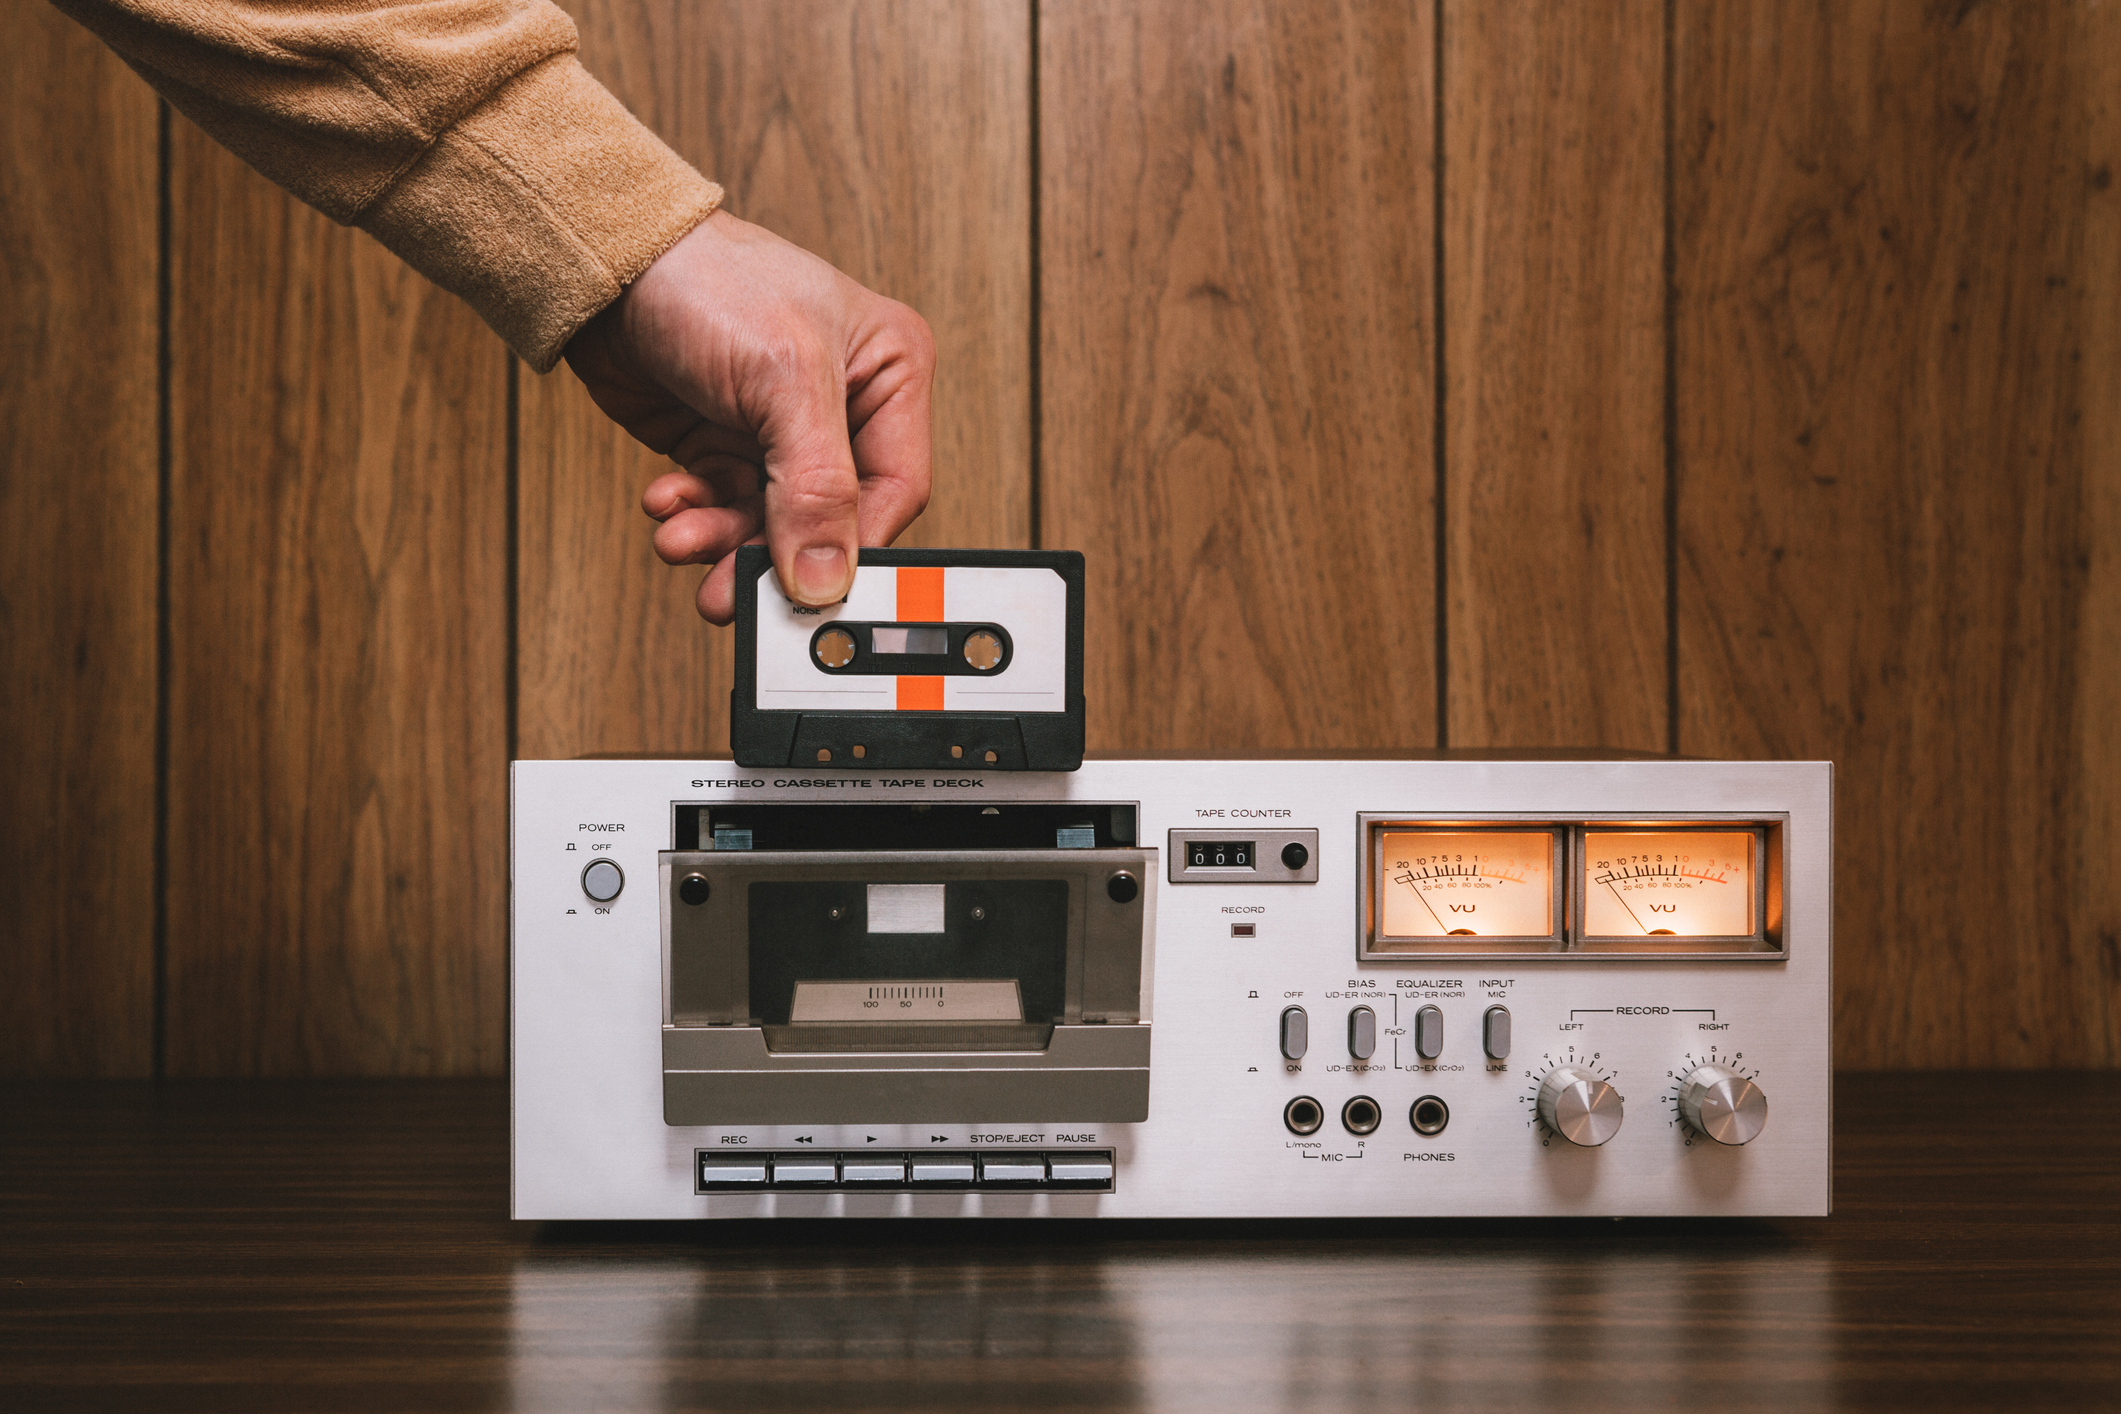 Hand inserting a cassette tape into a vintage player with VU meters on a wooden surface